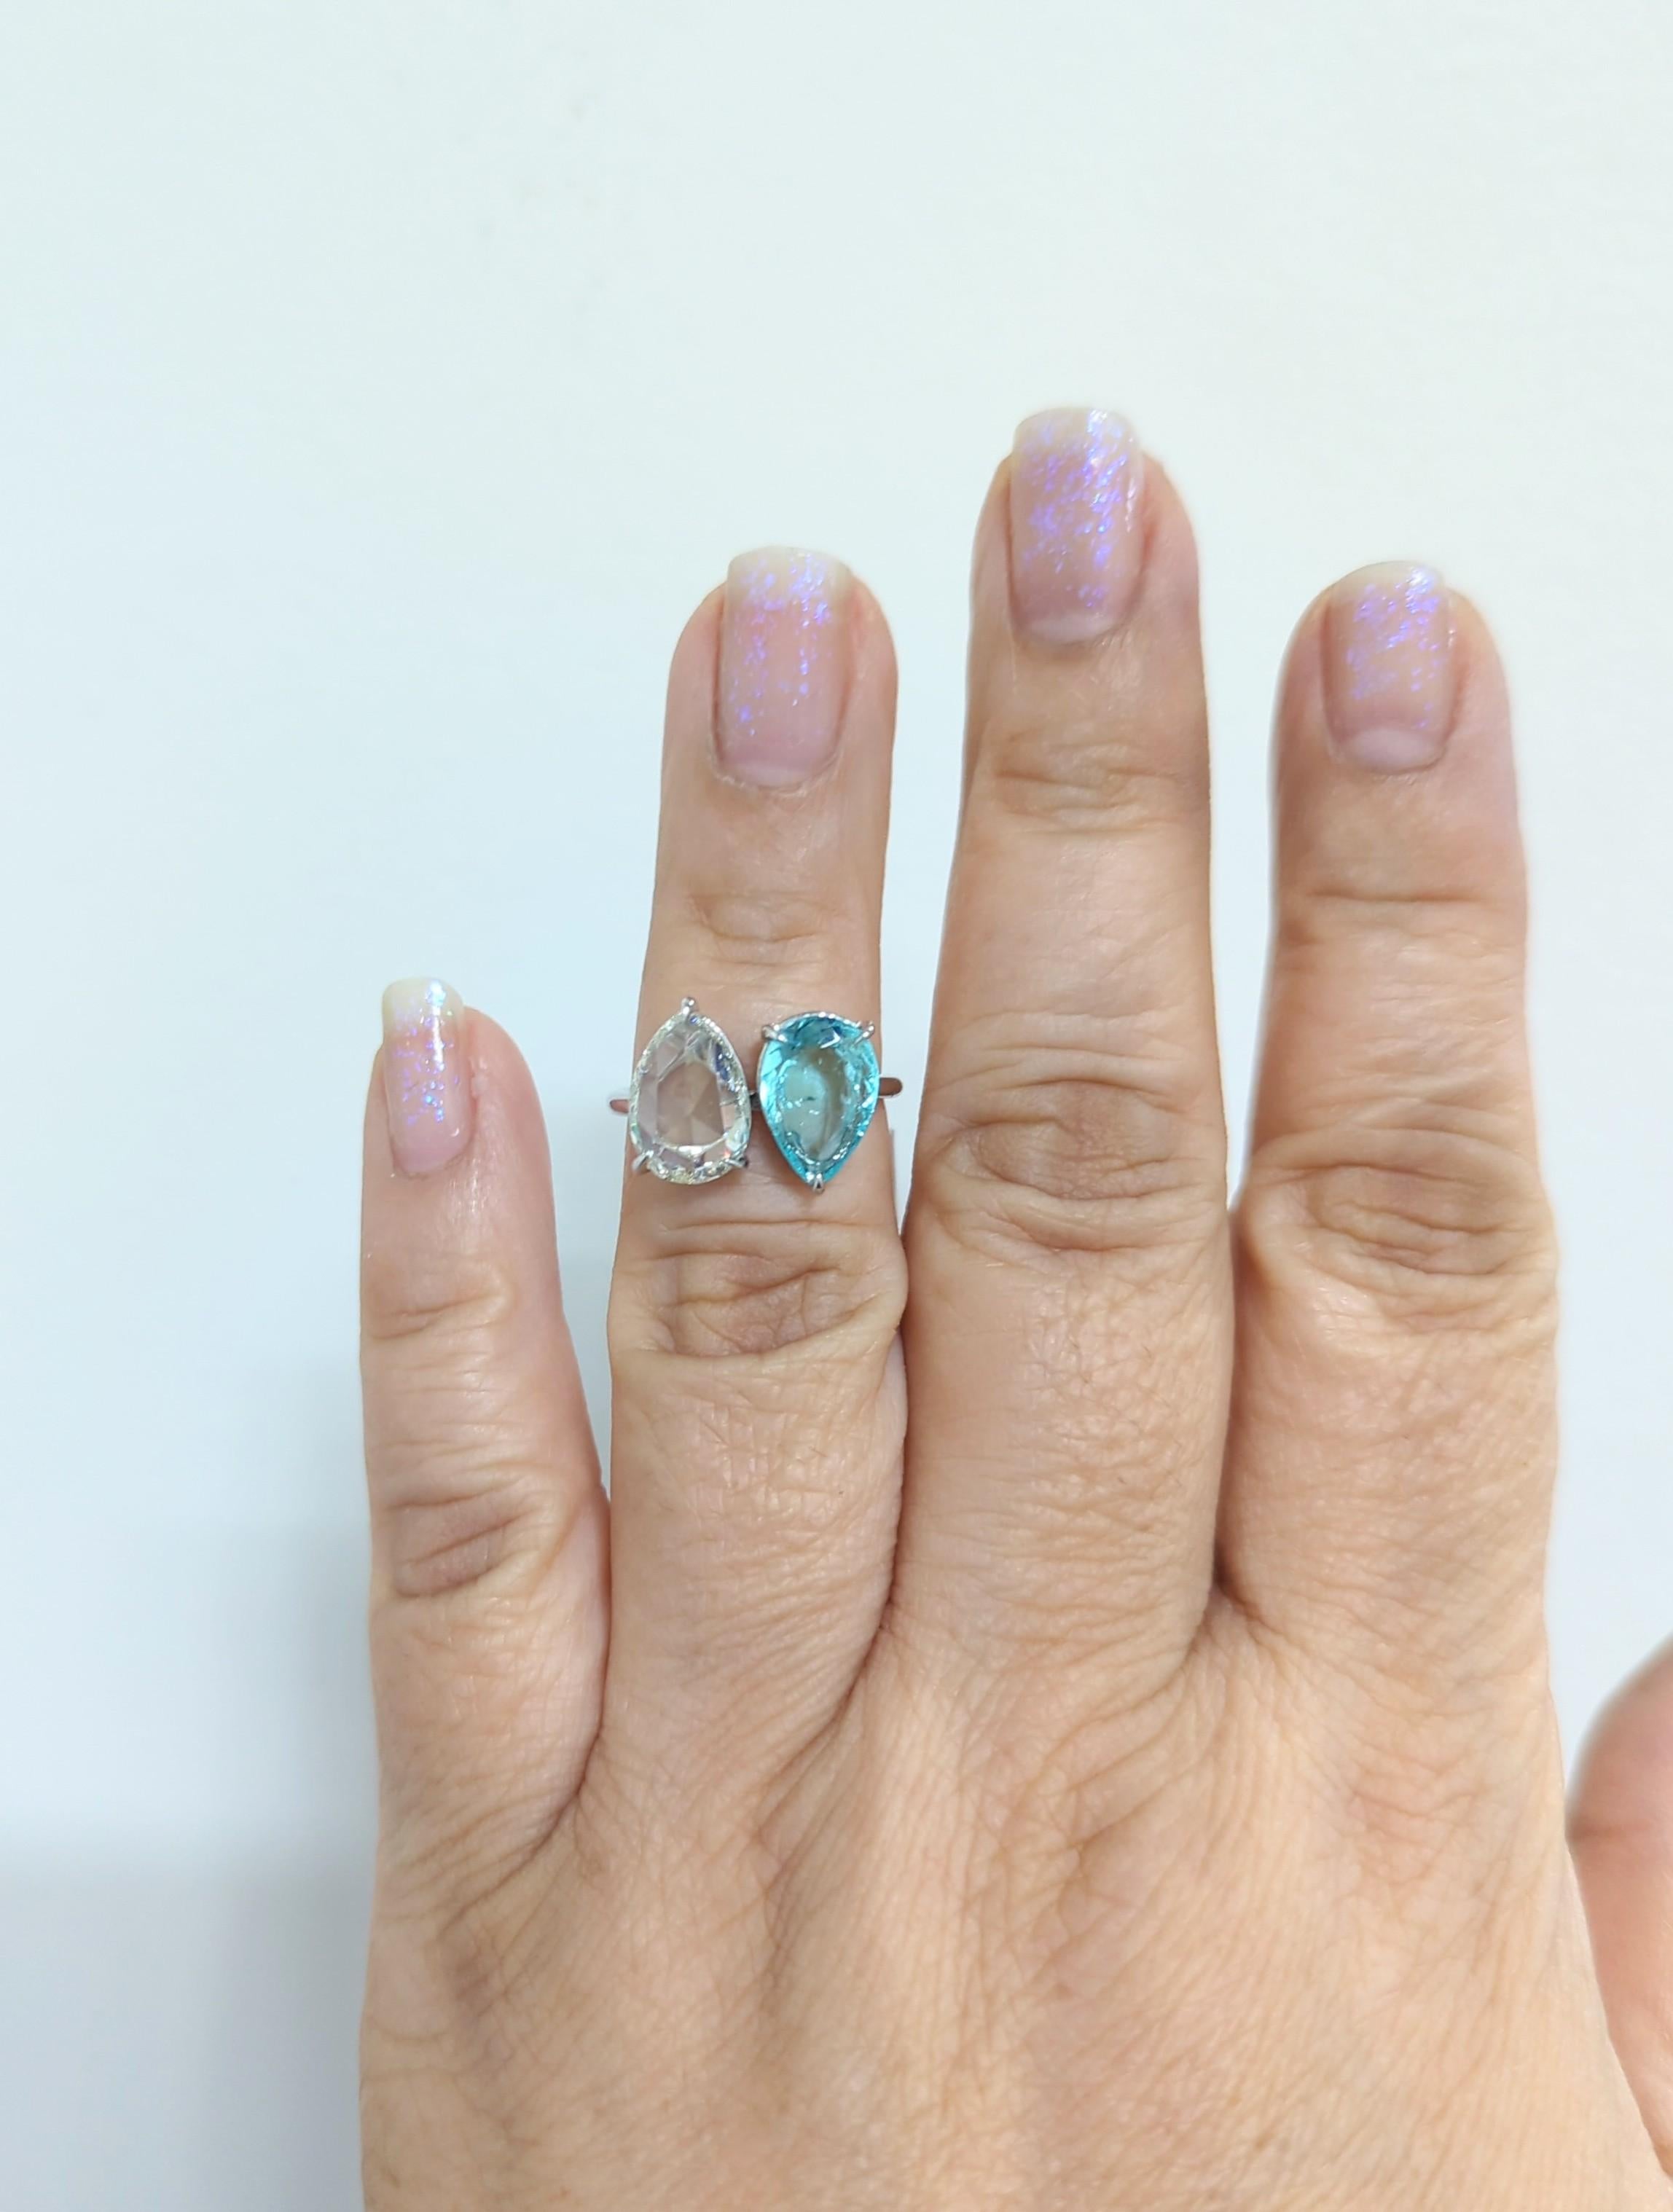 Absolutely stunning ring with a 2.32 ct. paraiba greenish blue tourmaline pear shape with a 2.09 ct. white diamond J SI1 pear shape.  Handmade in platinum.  Ring size 6.5.  GIA certificates included.